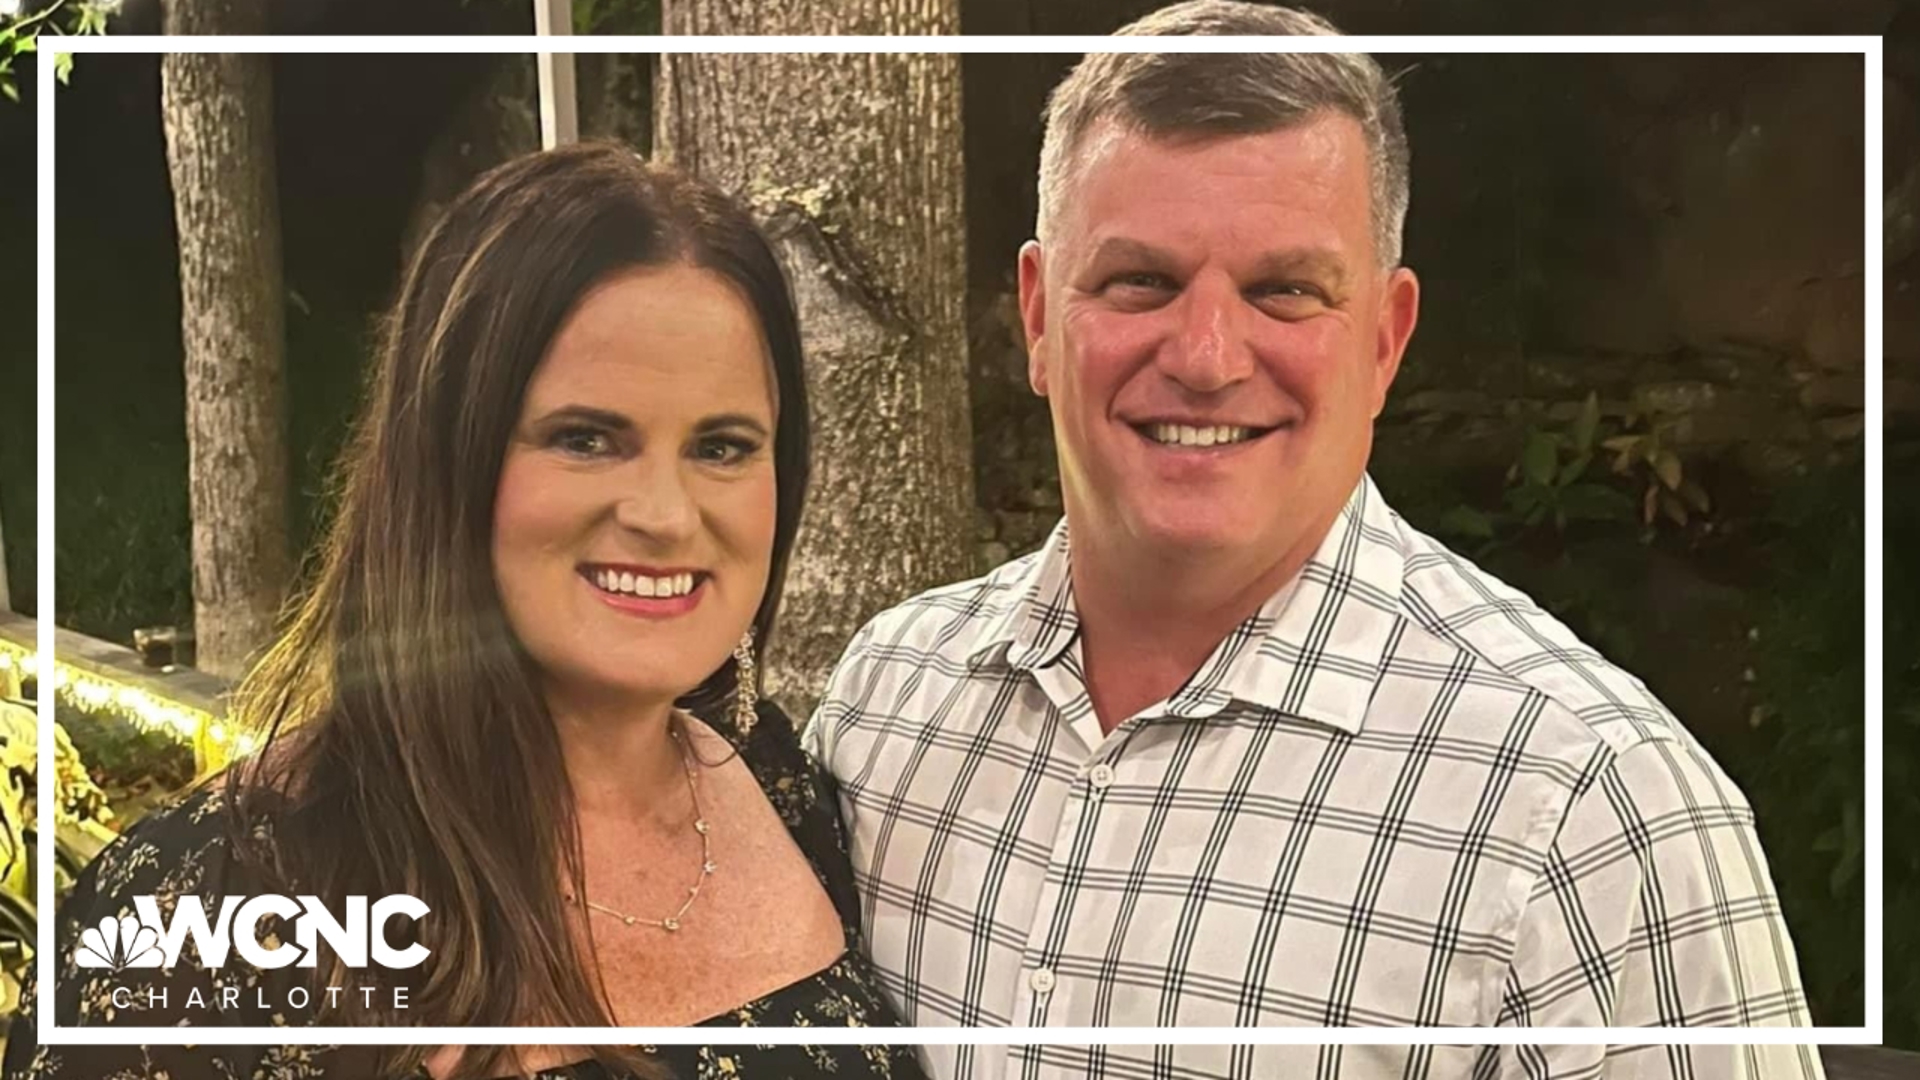 Nearly two months after that tragic day, Kelly Weeks spoke with WCNC Charlotte Anchor Sarah French about the memories that still fill their home and her heart.